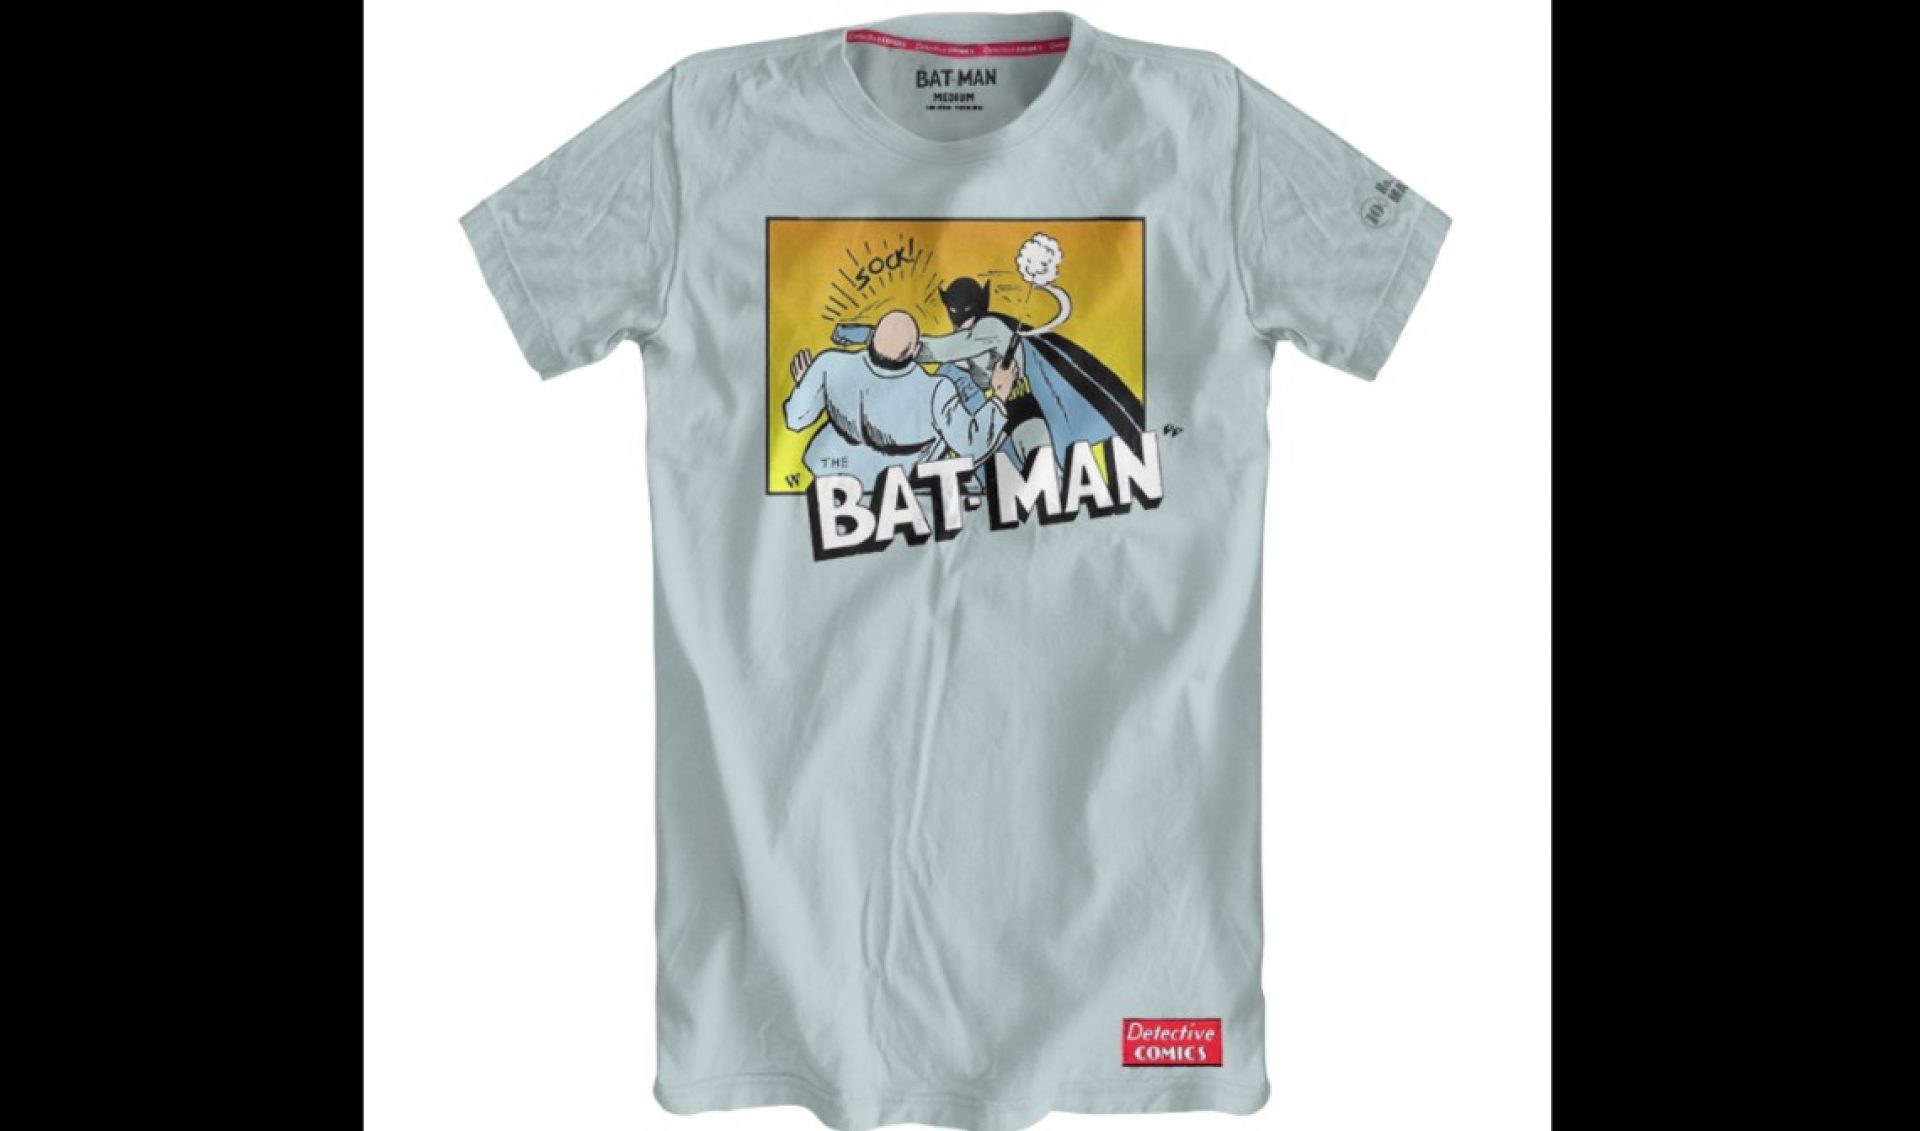 WarnerMedia-Owned Rooster Teeth, DC To Launch Clothing Collection For Batman’s 80th Anniversary